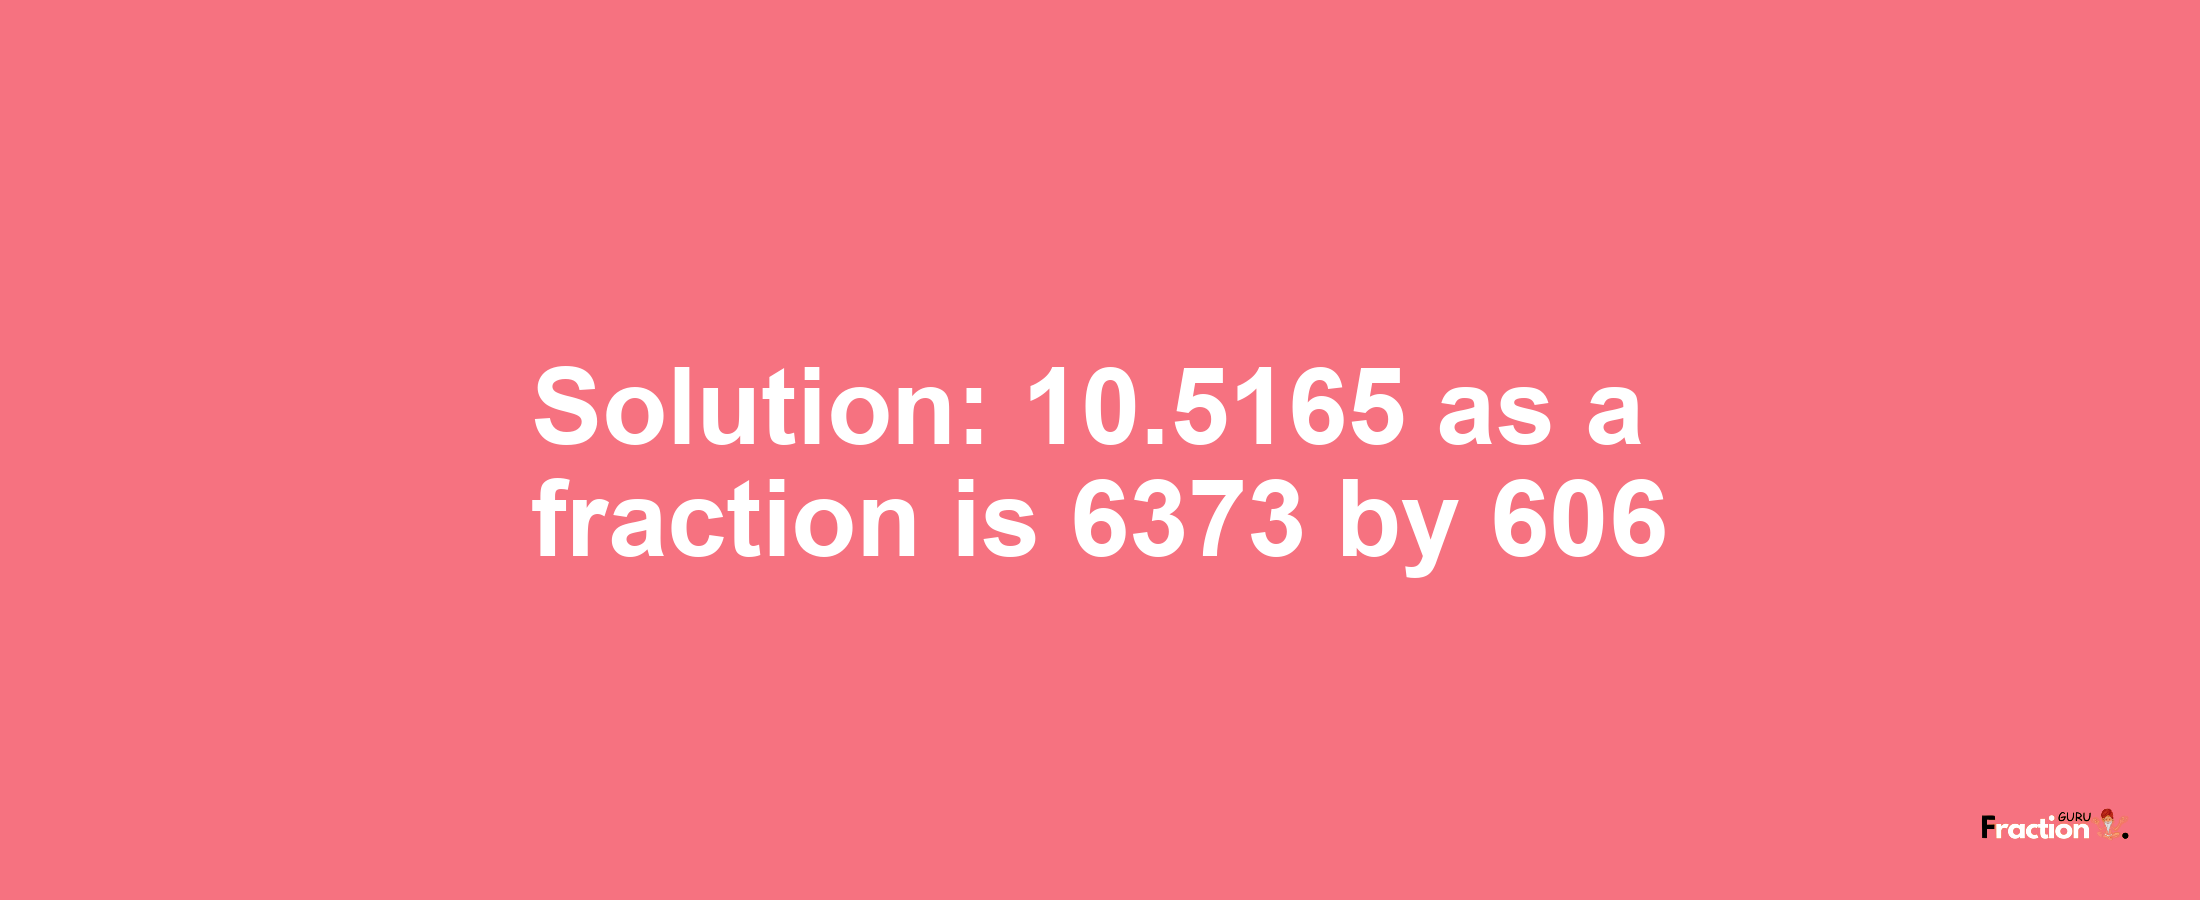 Solution:10.5165 as a fraction is 6373/606